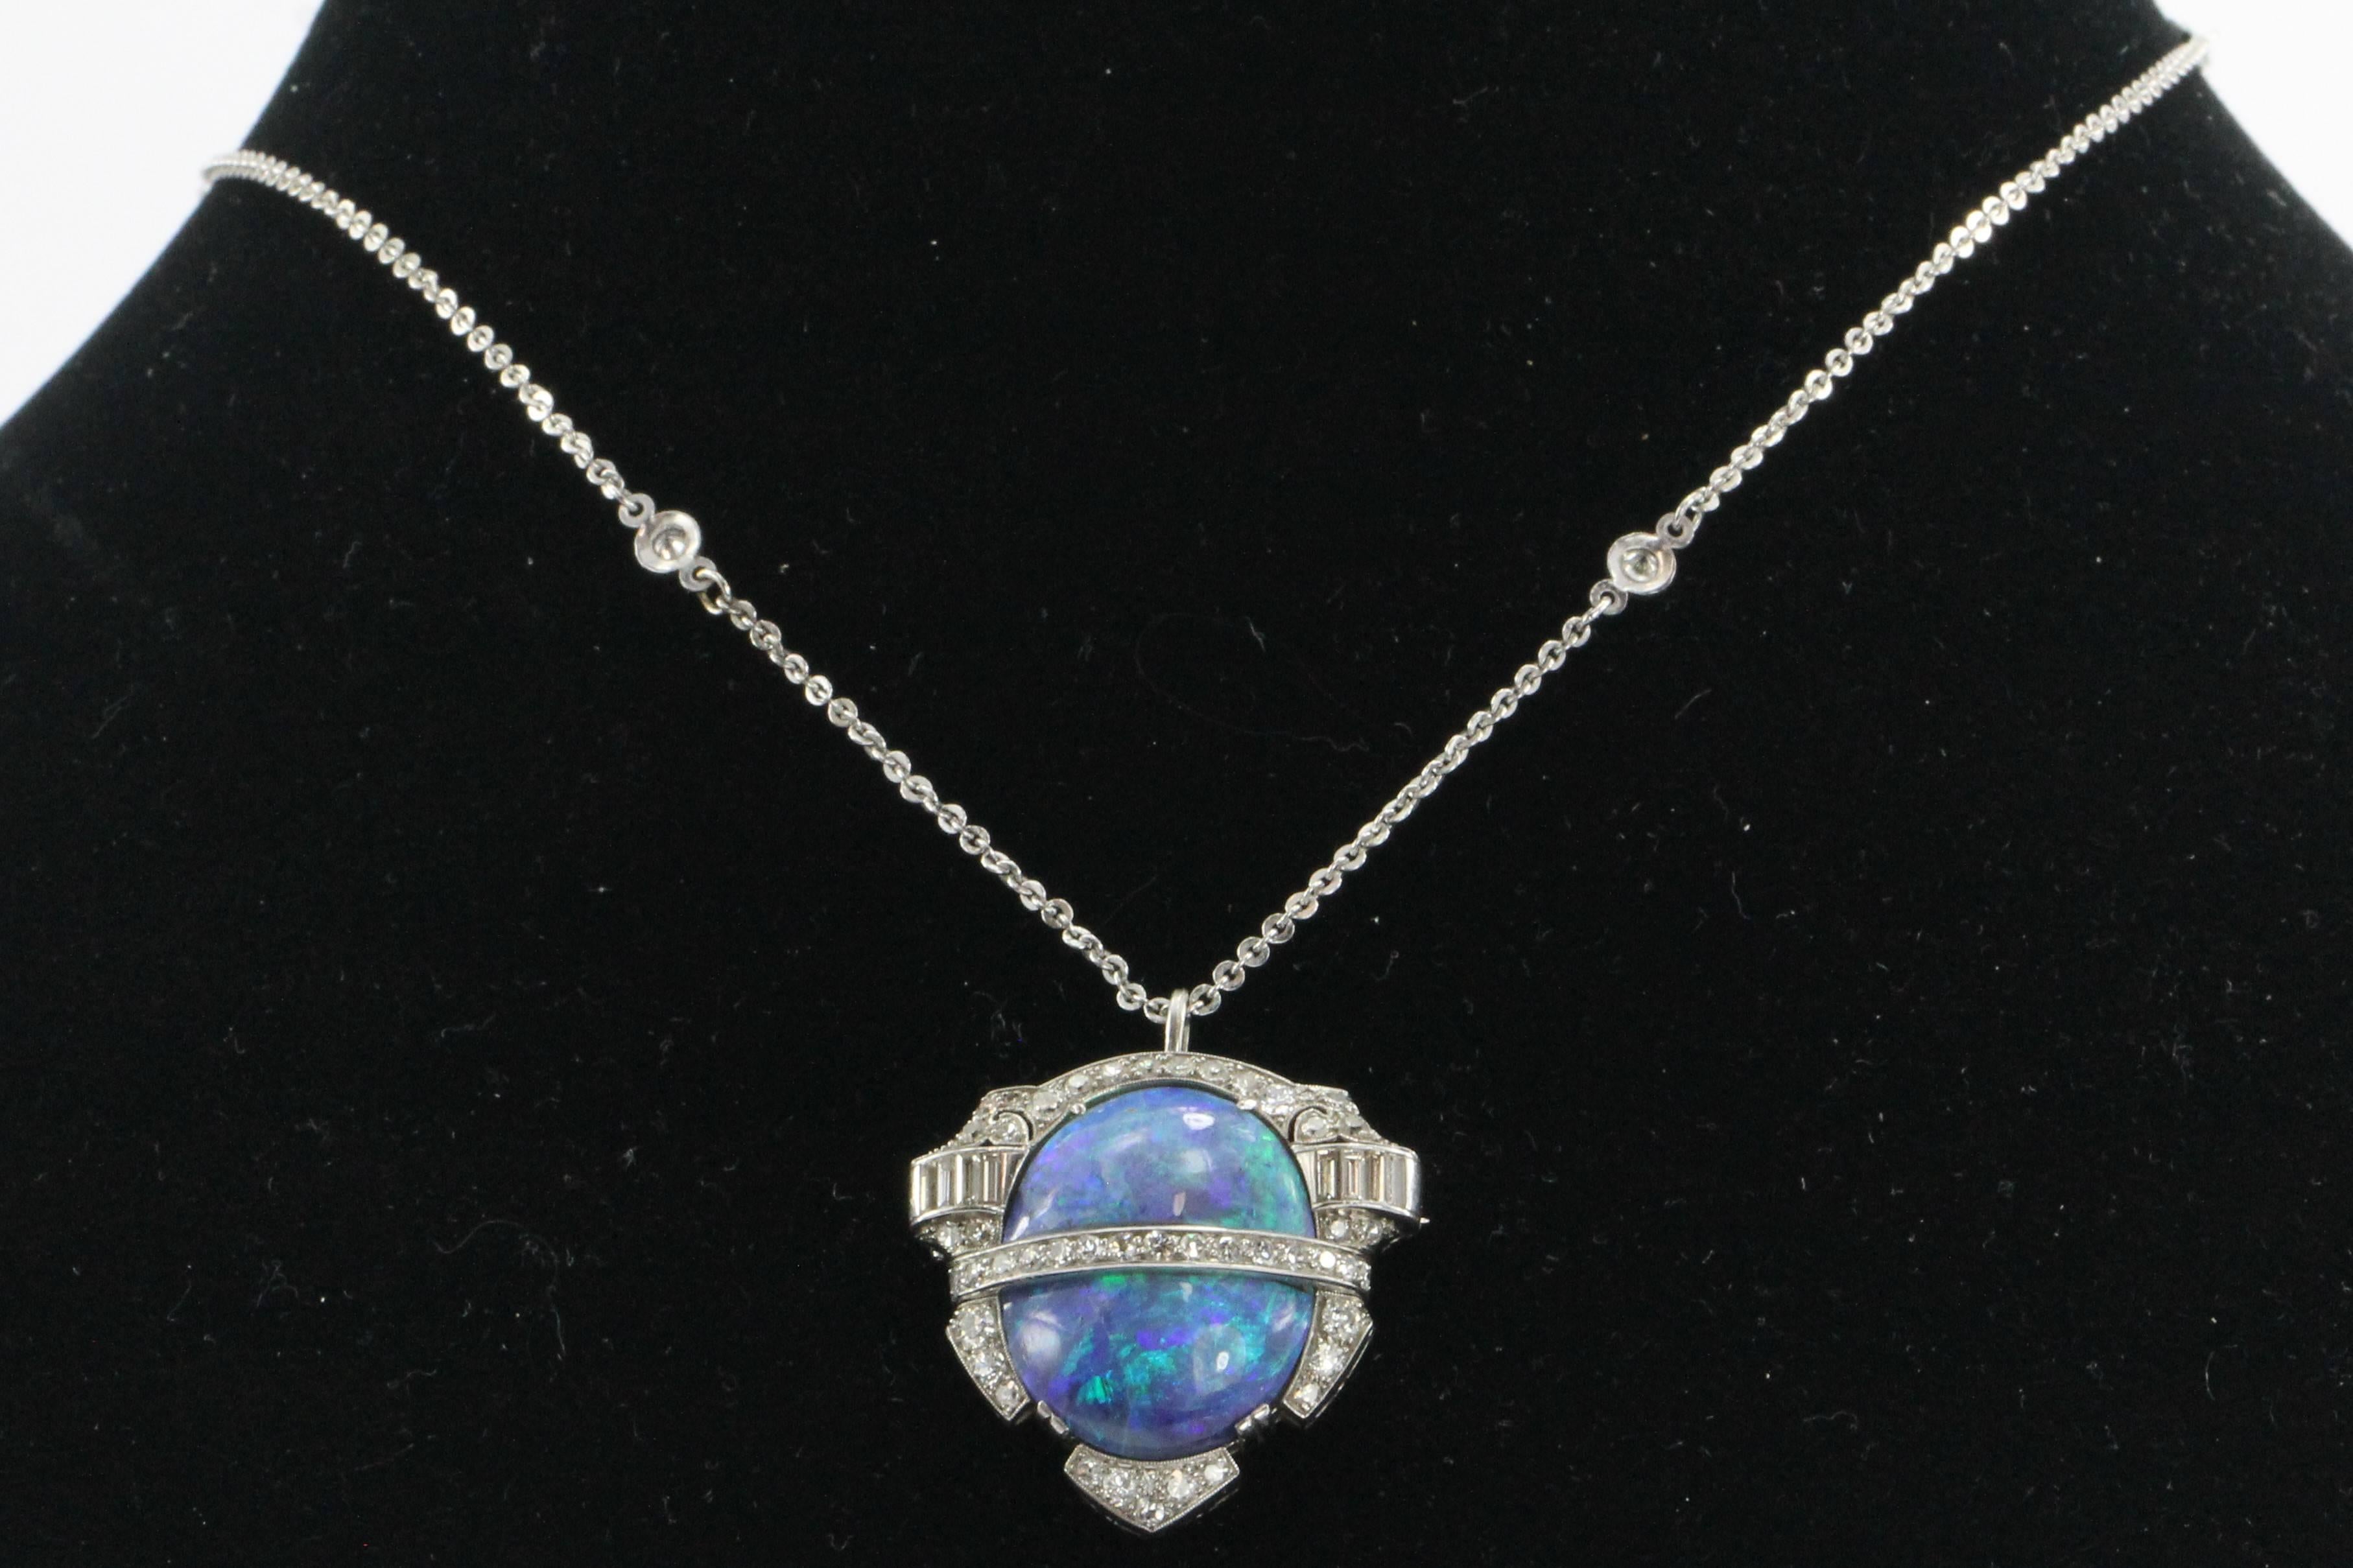 The bklaopal is actually two 7.5 carat opals totaling 15 carats.  The opals are set in platinum and framed by 2 carats of D / E color, Vvs1 / Vvs2 clarity single cut and baguette diamonds. The piece can be worn as a brooch or pendant. The bezel that